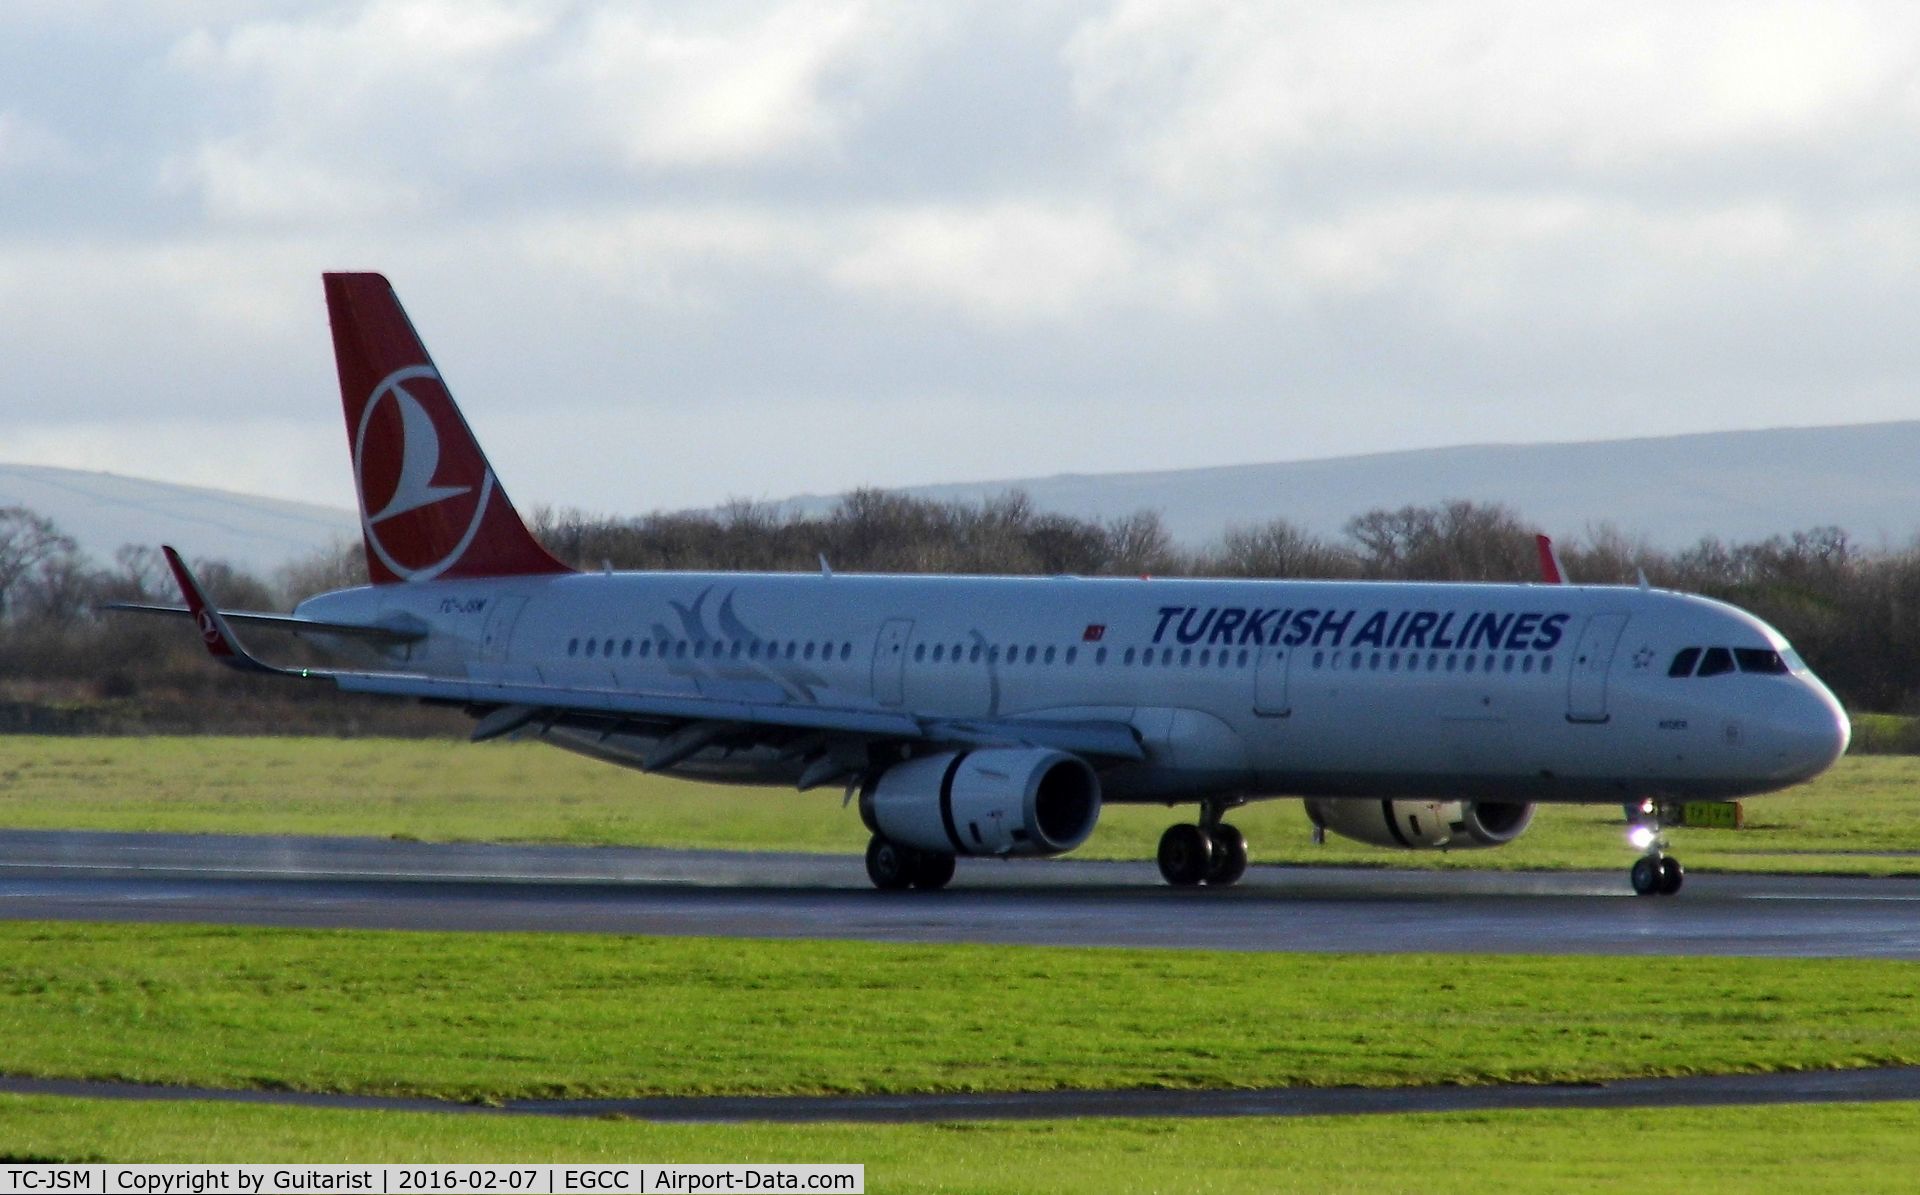 TC-JSM, 2013 Airbus A321-231 C/N 5689, At Manchester